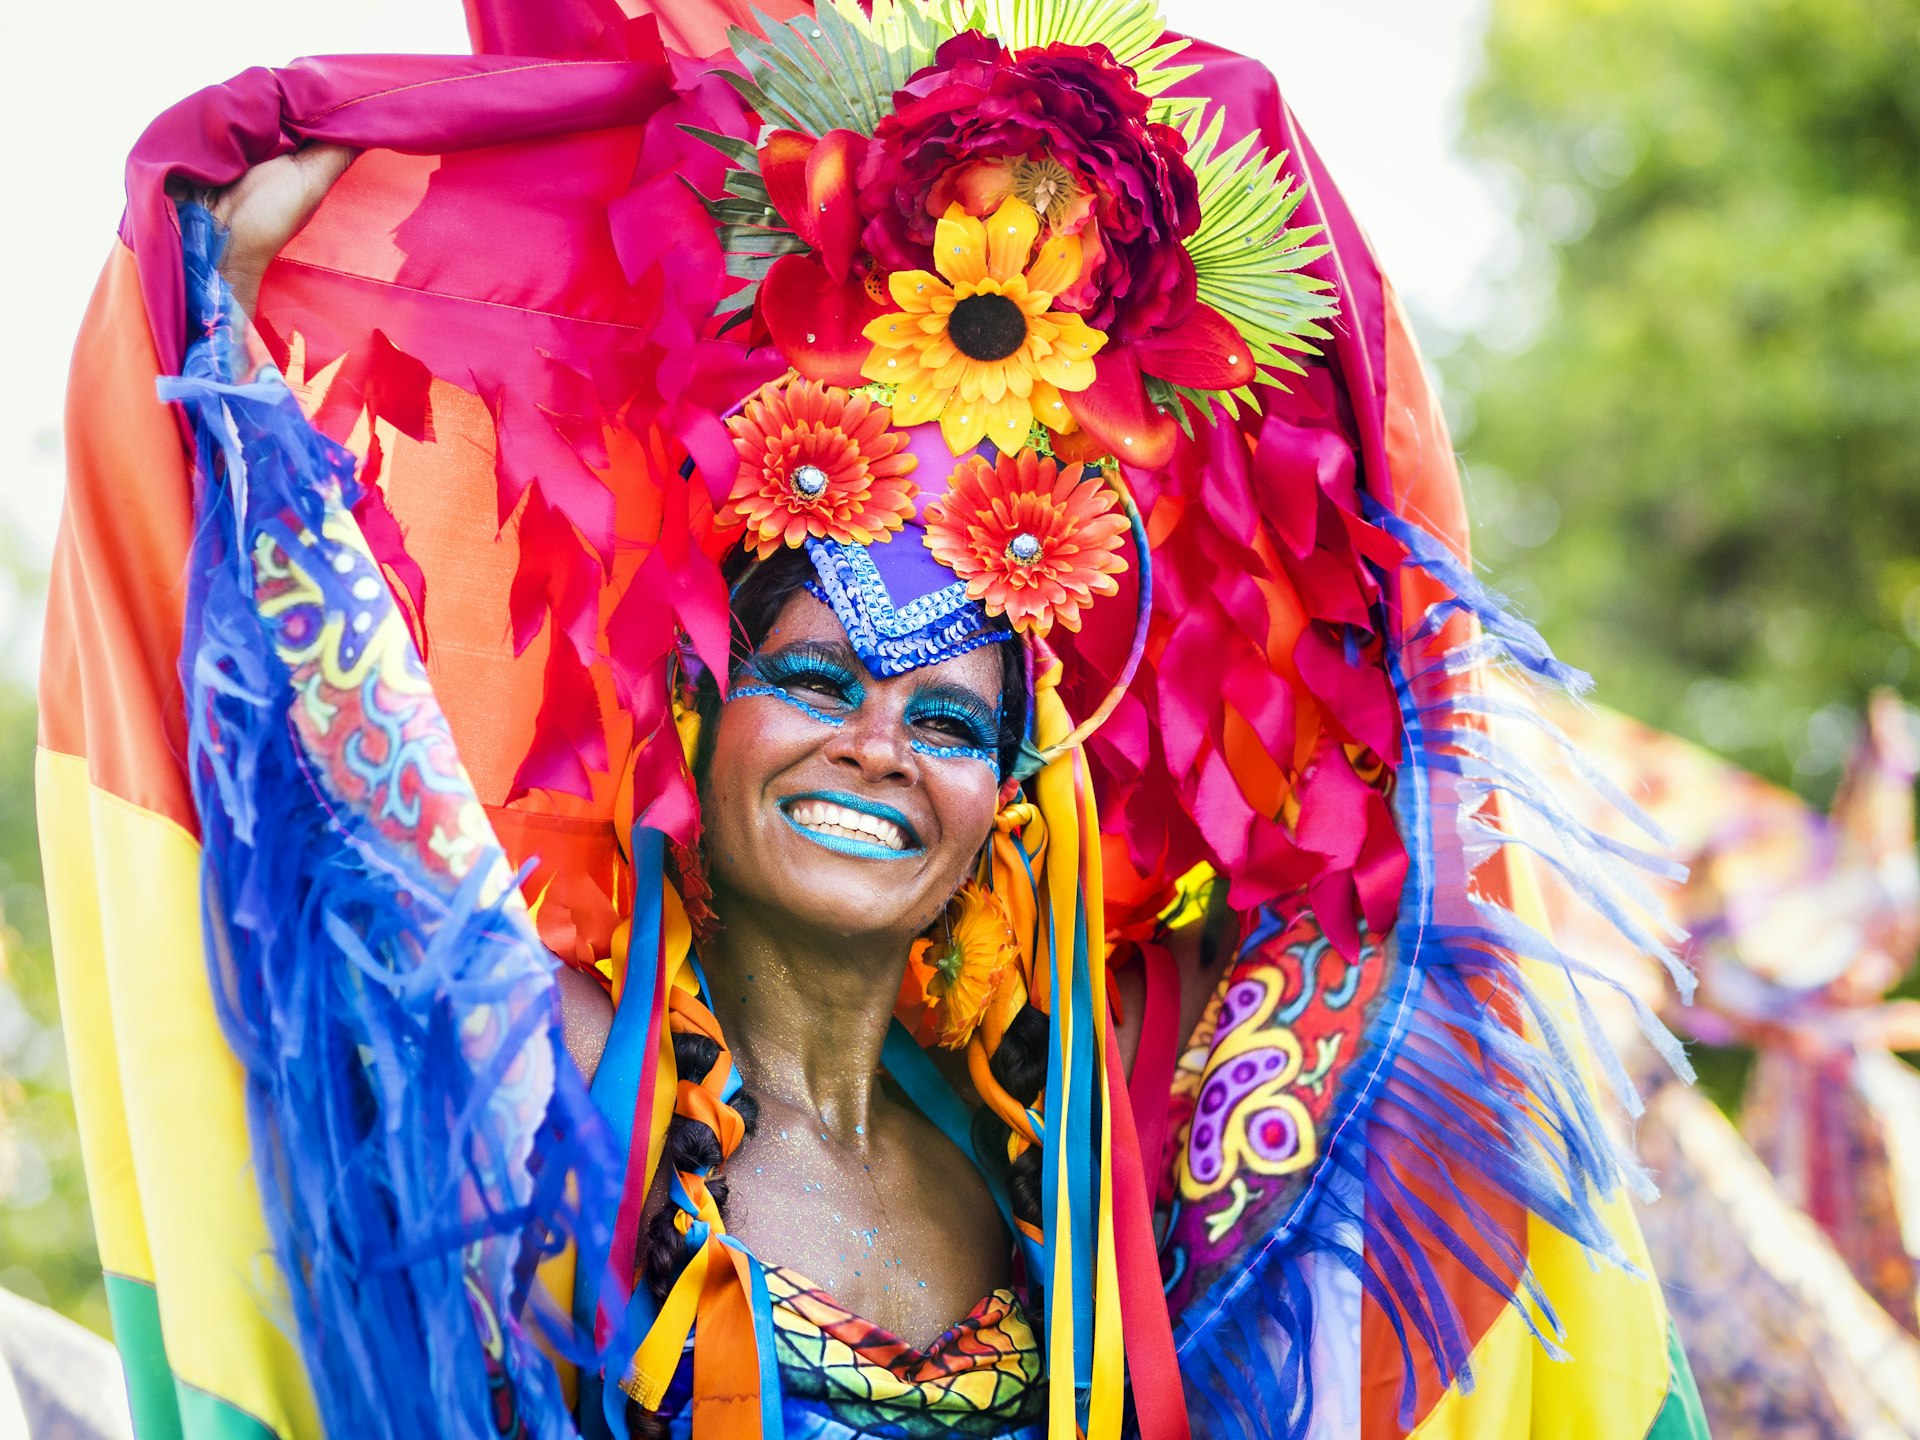 A close-up of a smiling samba dancer in a colorful costume with feathers and flowers, with blue face paint, during a bright and festive Rio Carnival celebration.